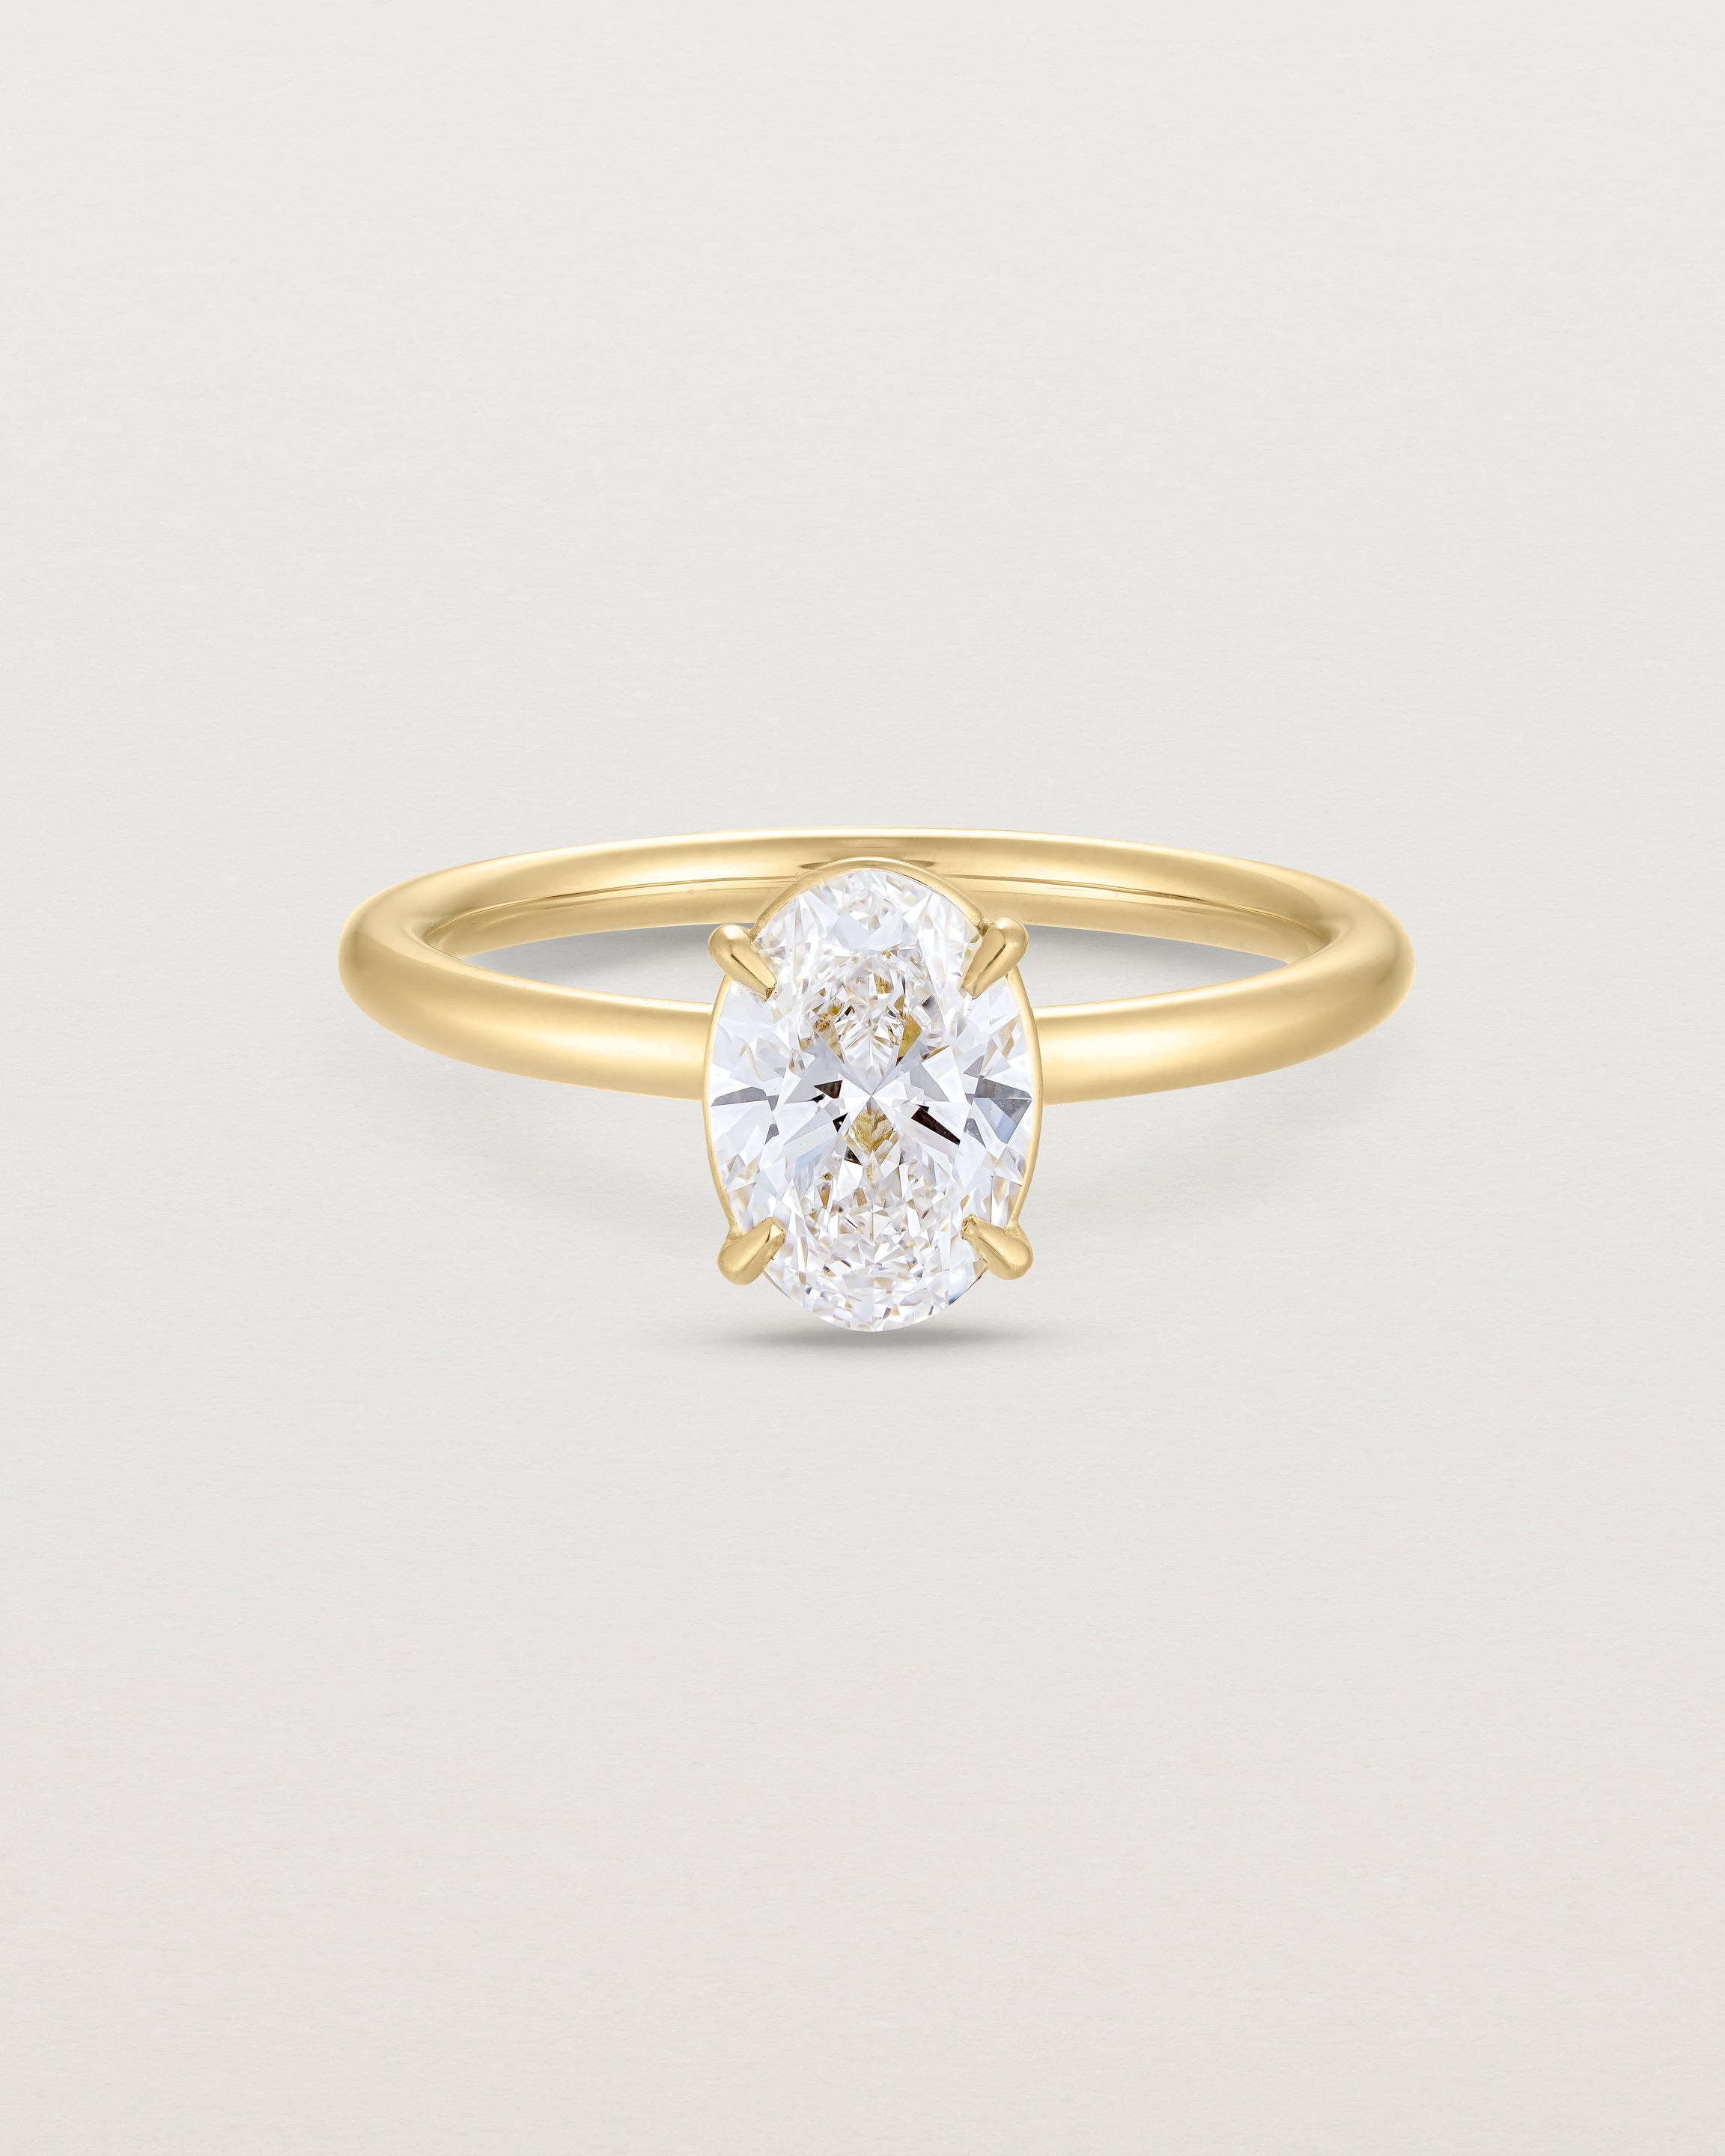 Front view of the No. 112 Signature Solitaire | Laboratory Grown Diamond in yellow gold.